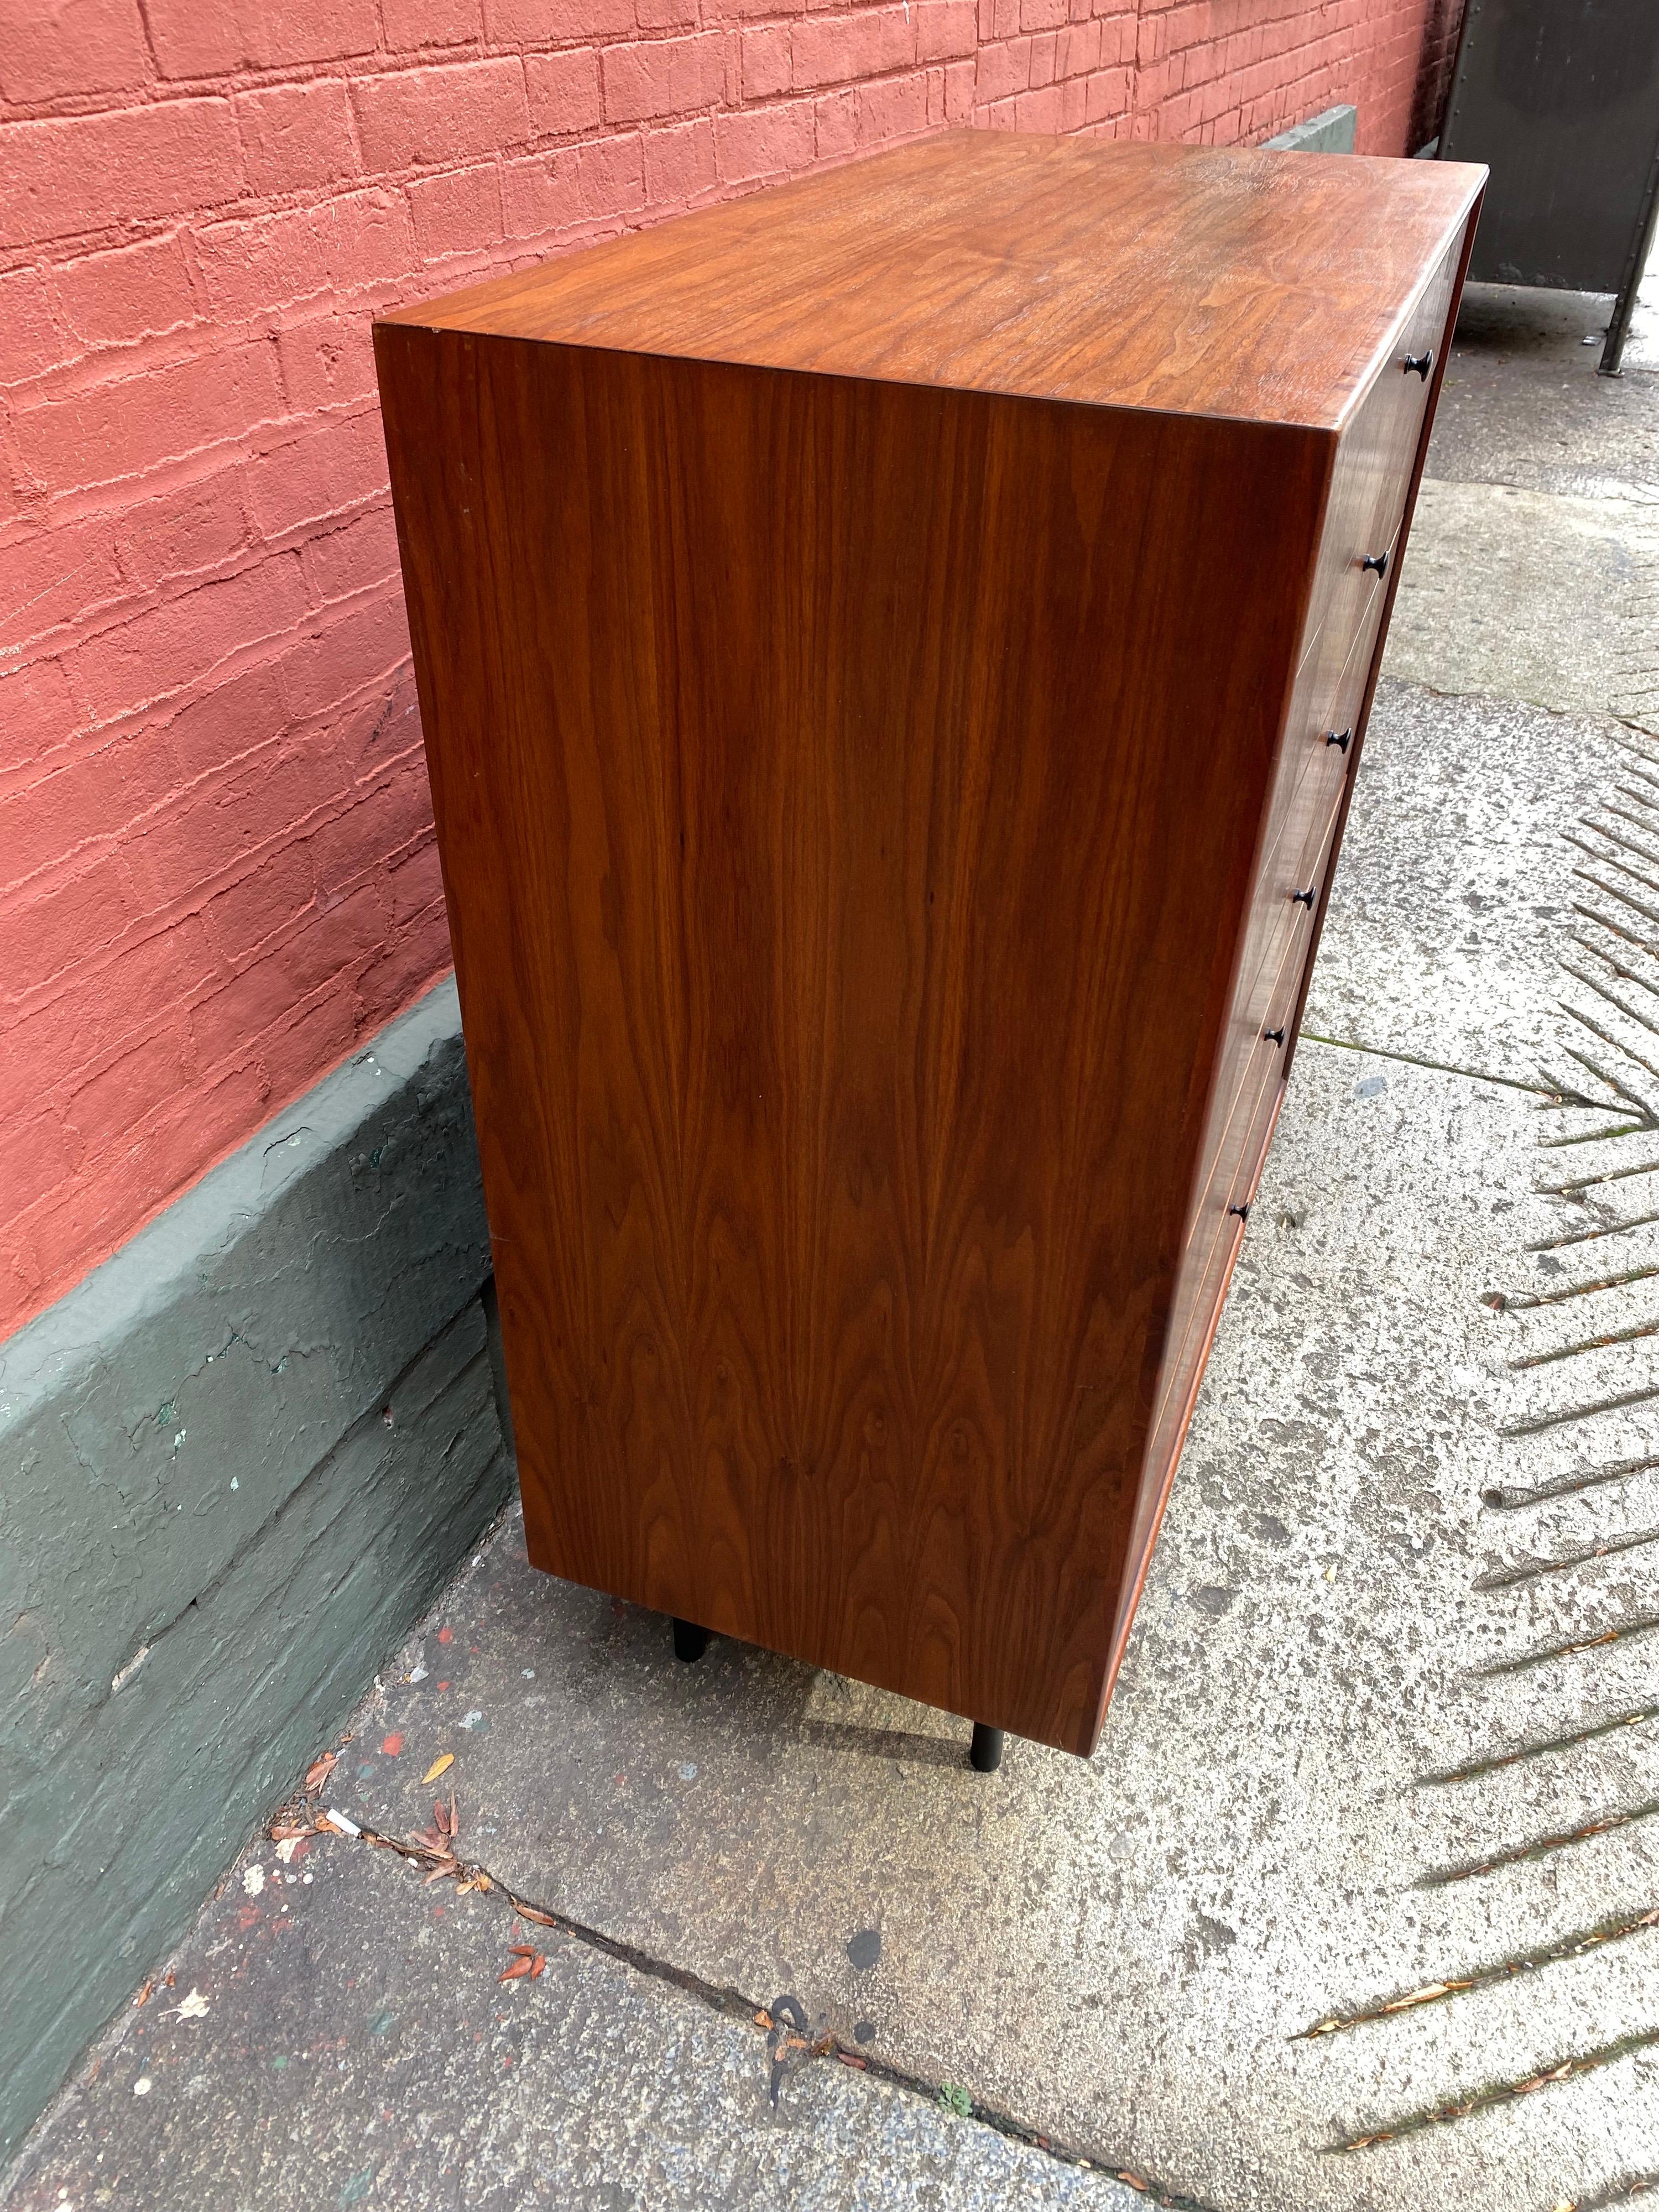 Beautiful Jack Cartwright walnut tall boy dresser with black wood inset detail and six drawers. Dovetail construction of drawers. Two available for sale.
size: 18